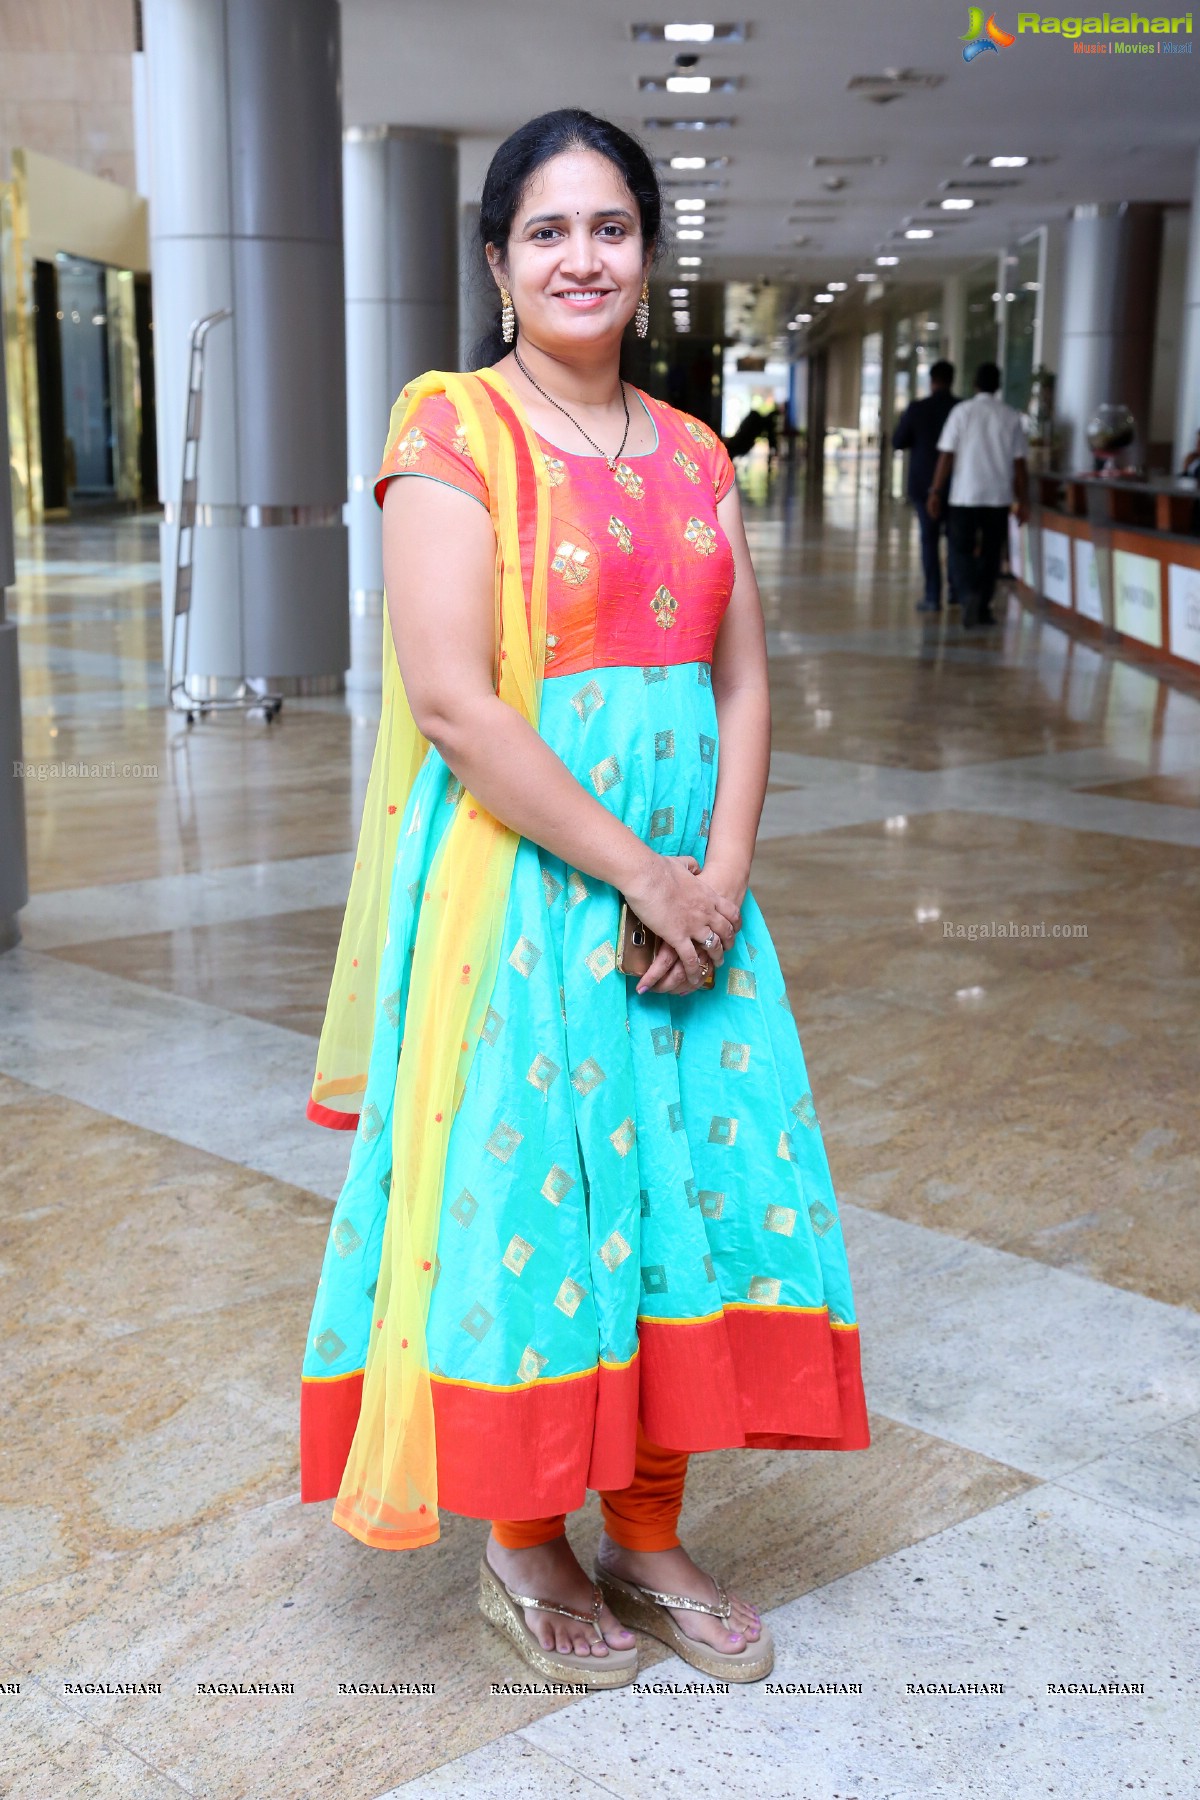 Launch of Trendz - Mom and Kids Exhibition at HICC Novotel, Hyderabad